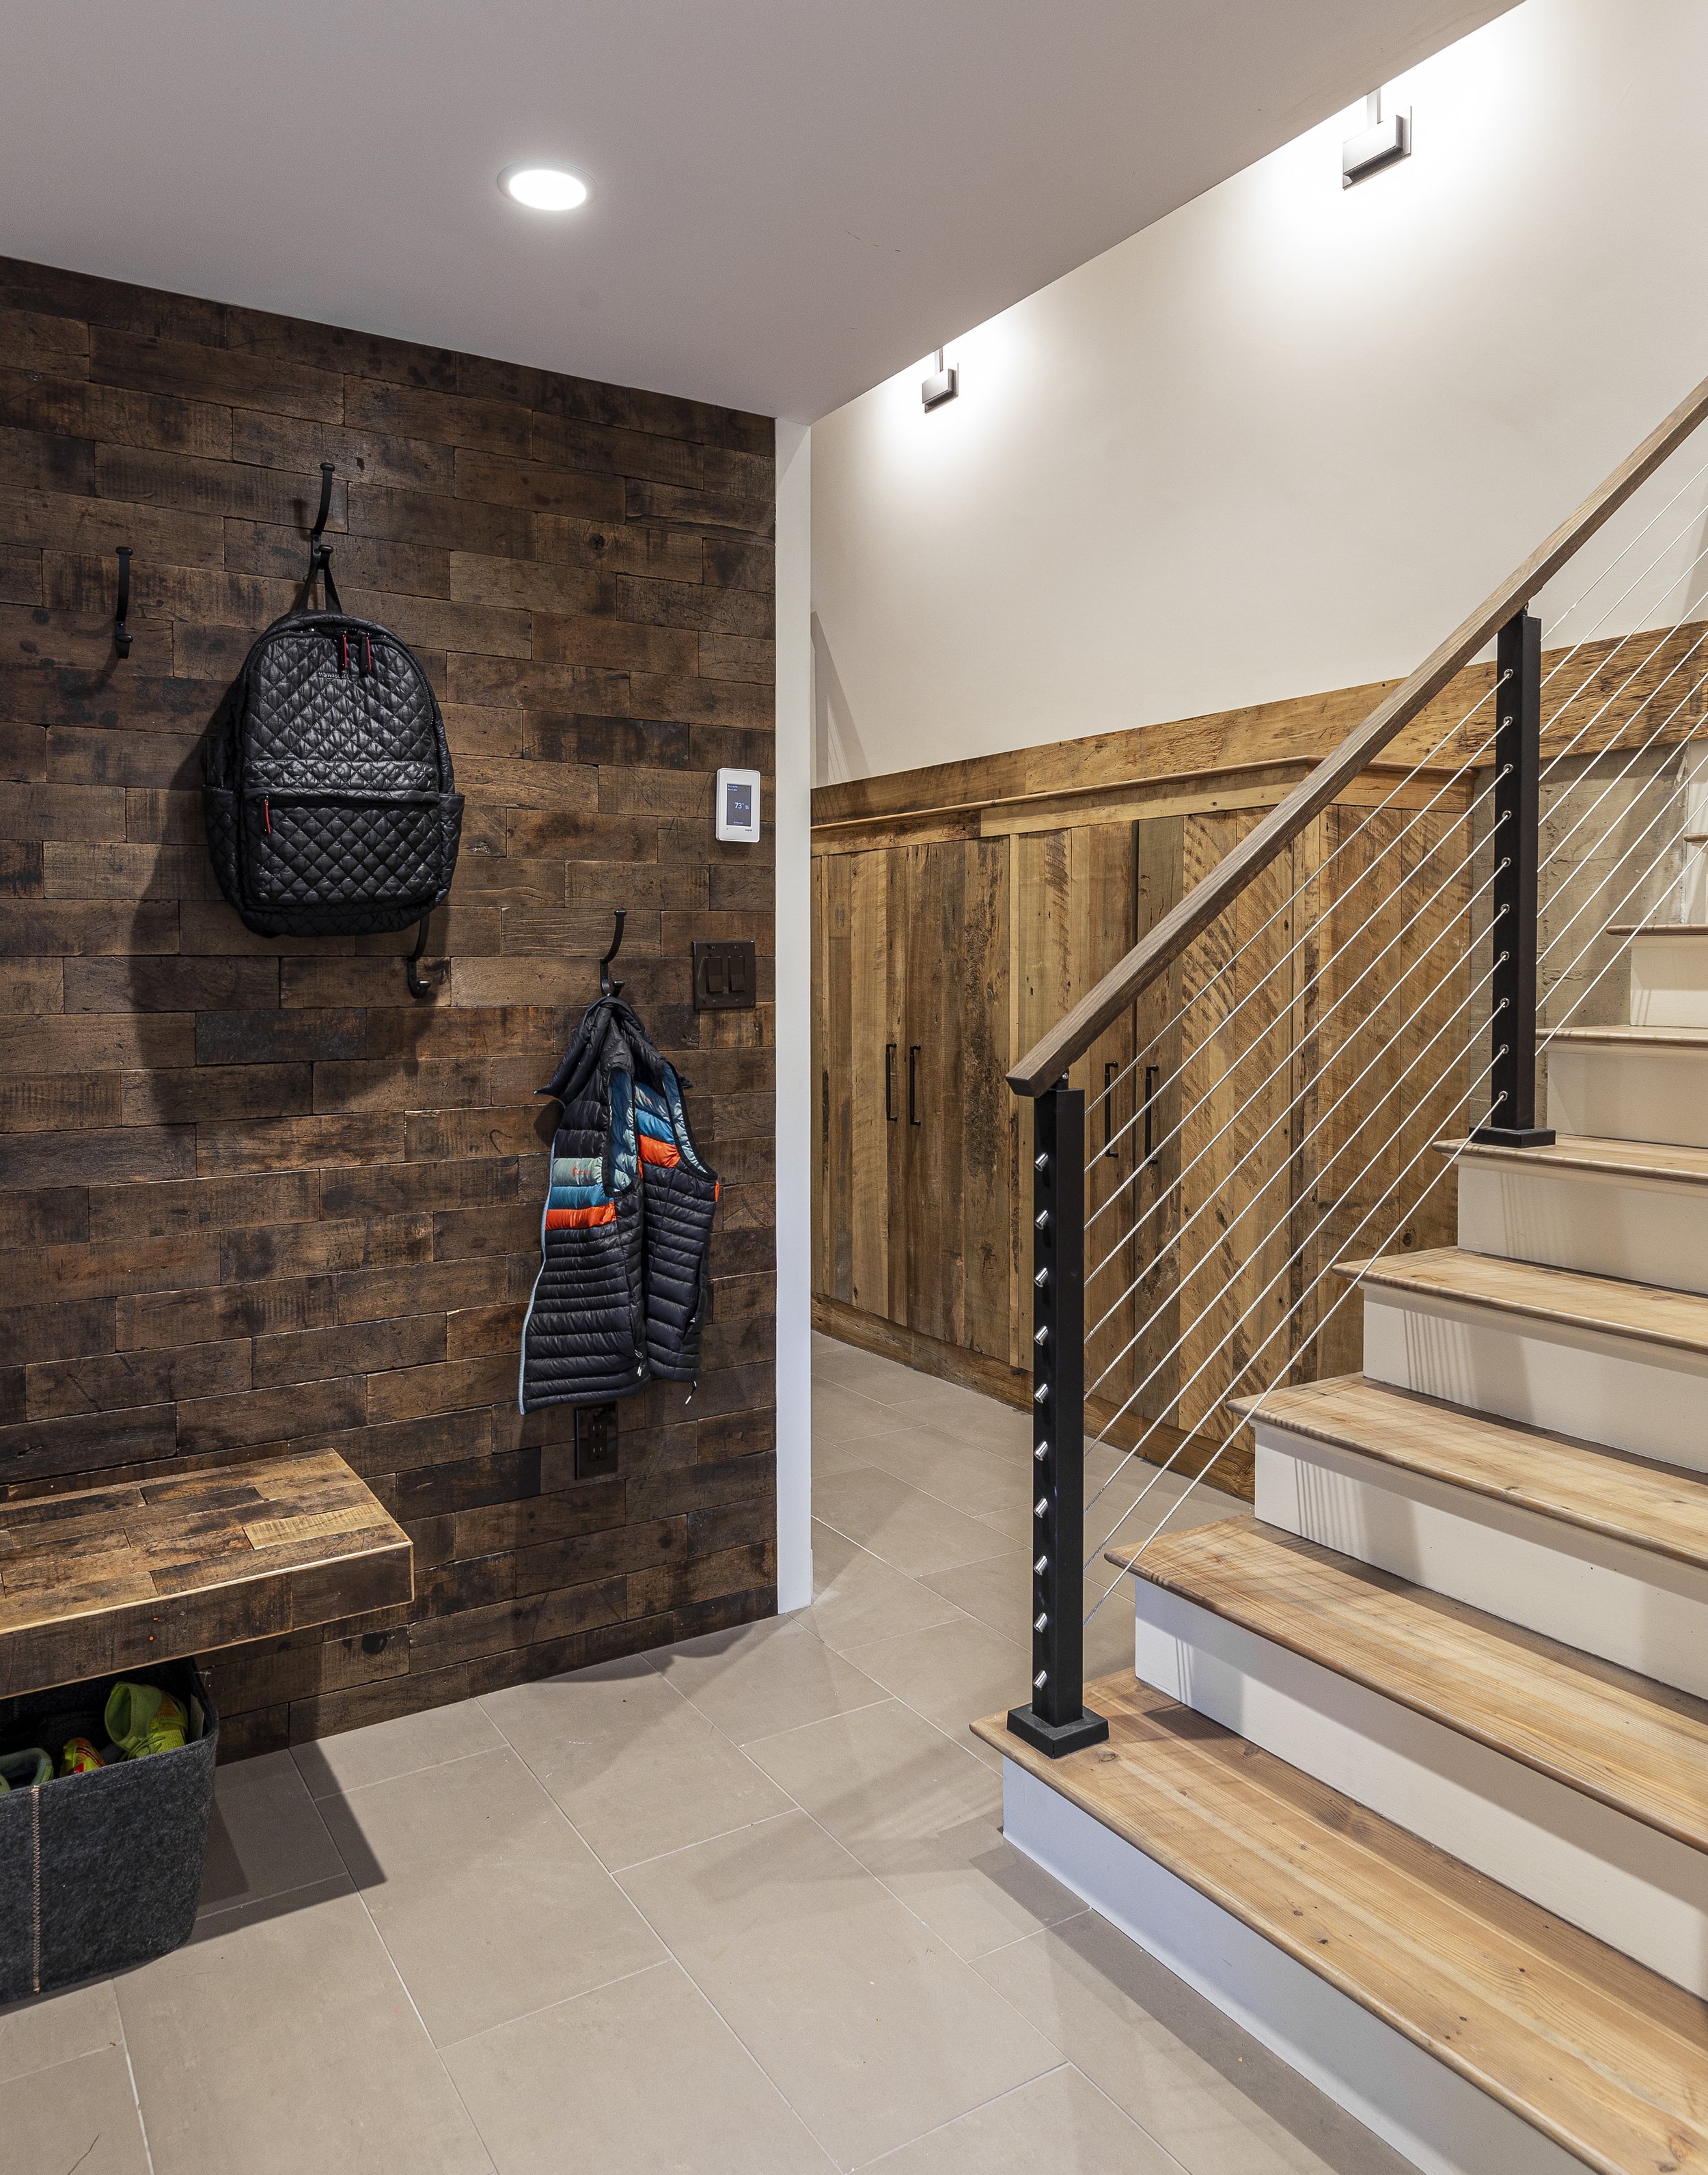 Mudroom+reclaimed+wood+Belmont+KITCHENVISIONS_residential+space+planners+designers.jpg